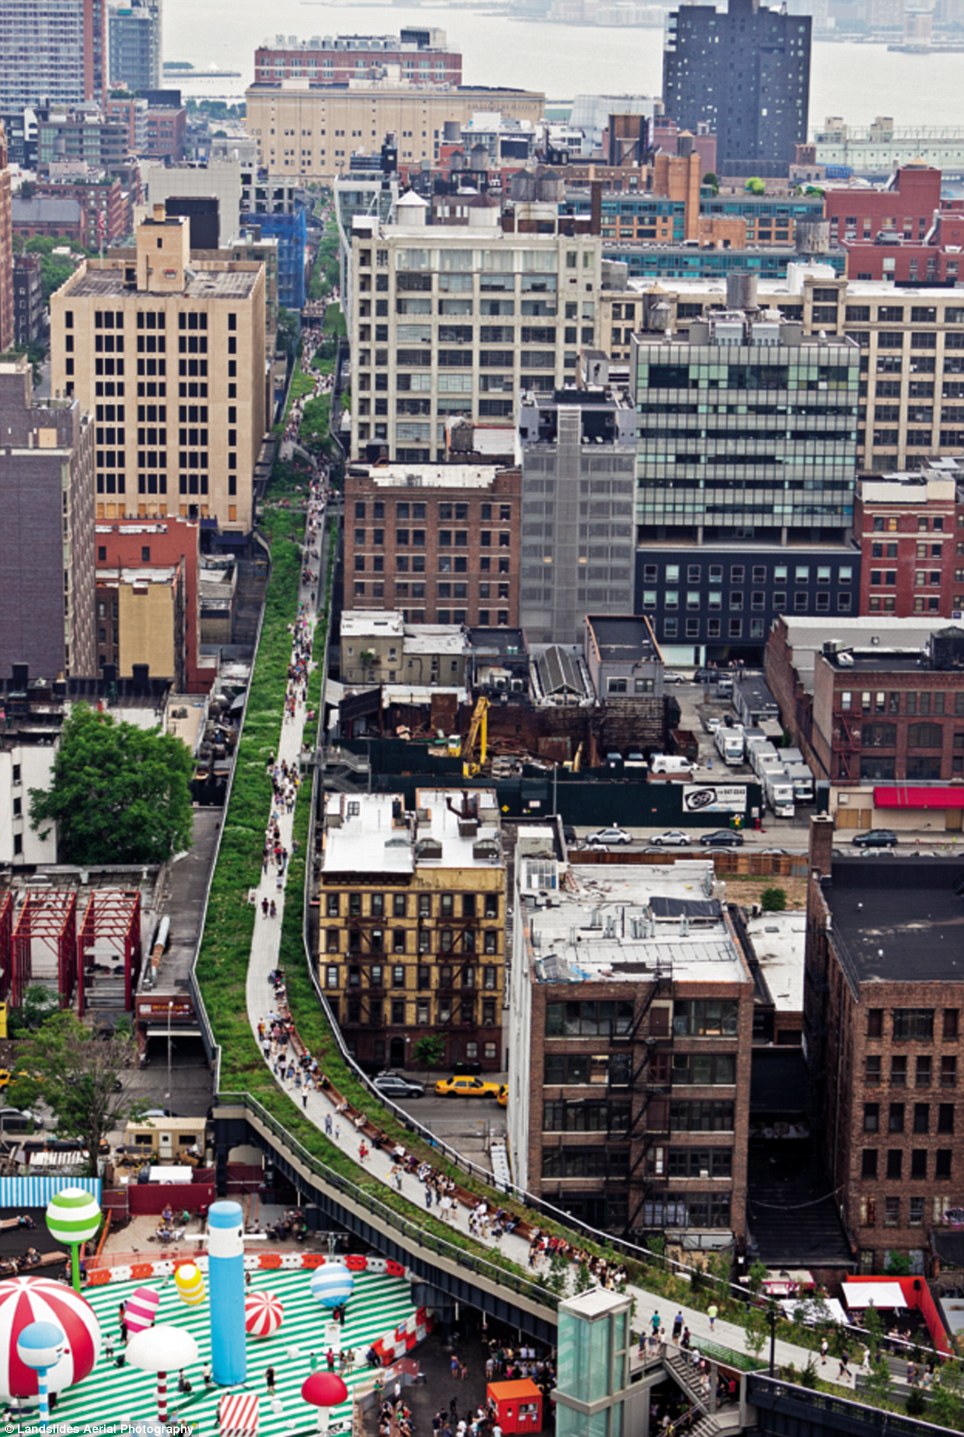    #4 The High Line, a 1.45 mile in-line park in Manhattan built on an old railroad track   